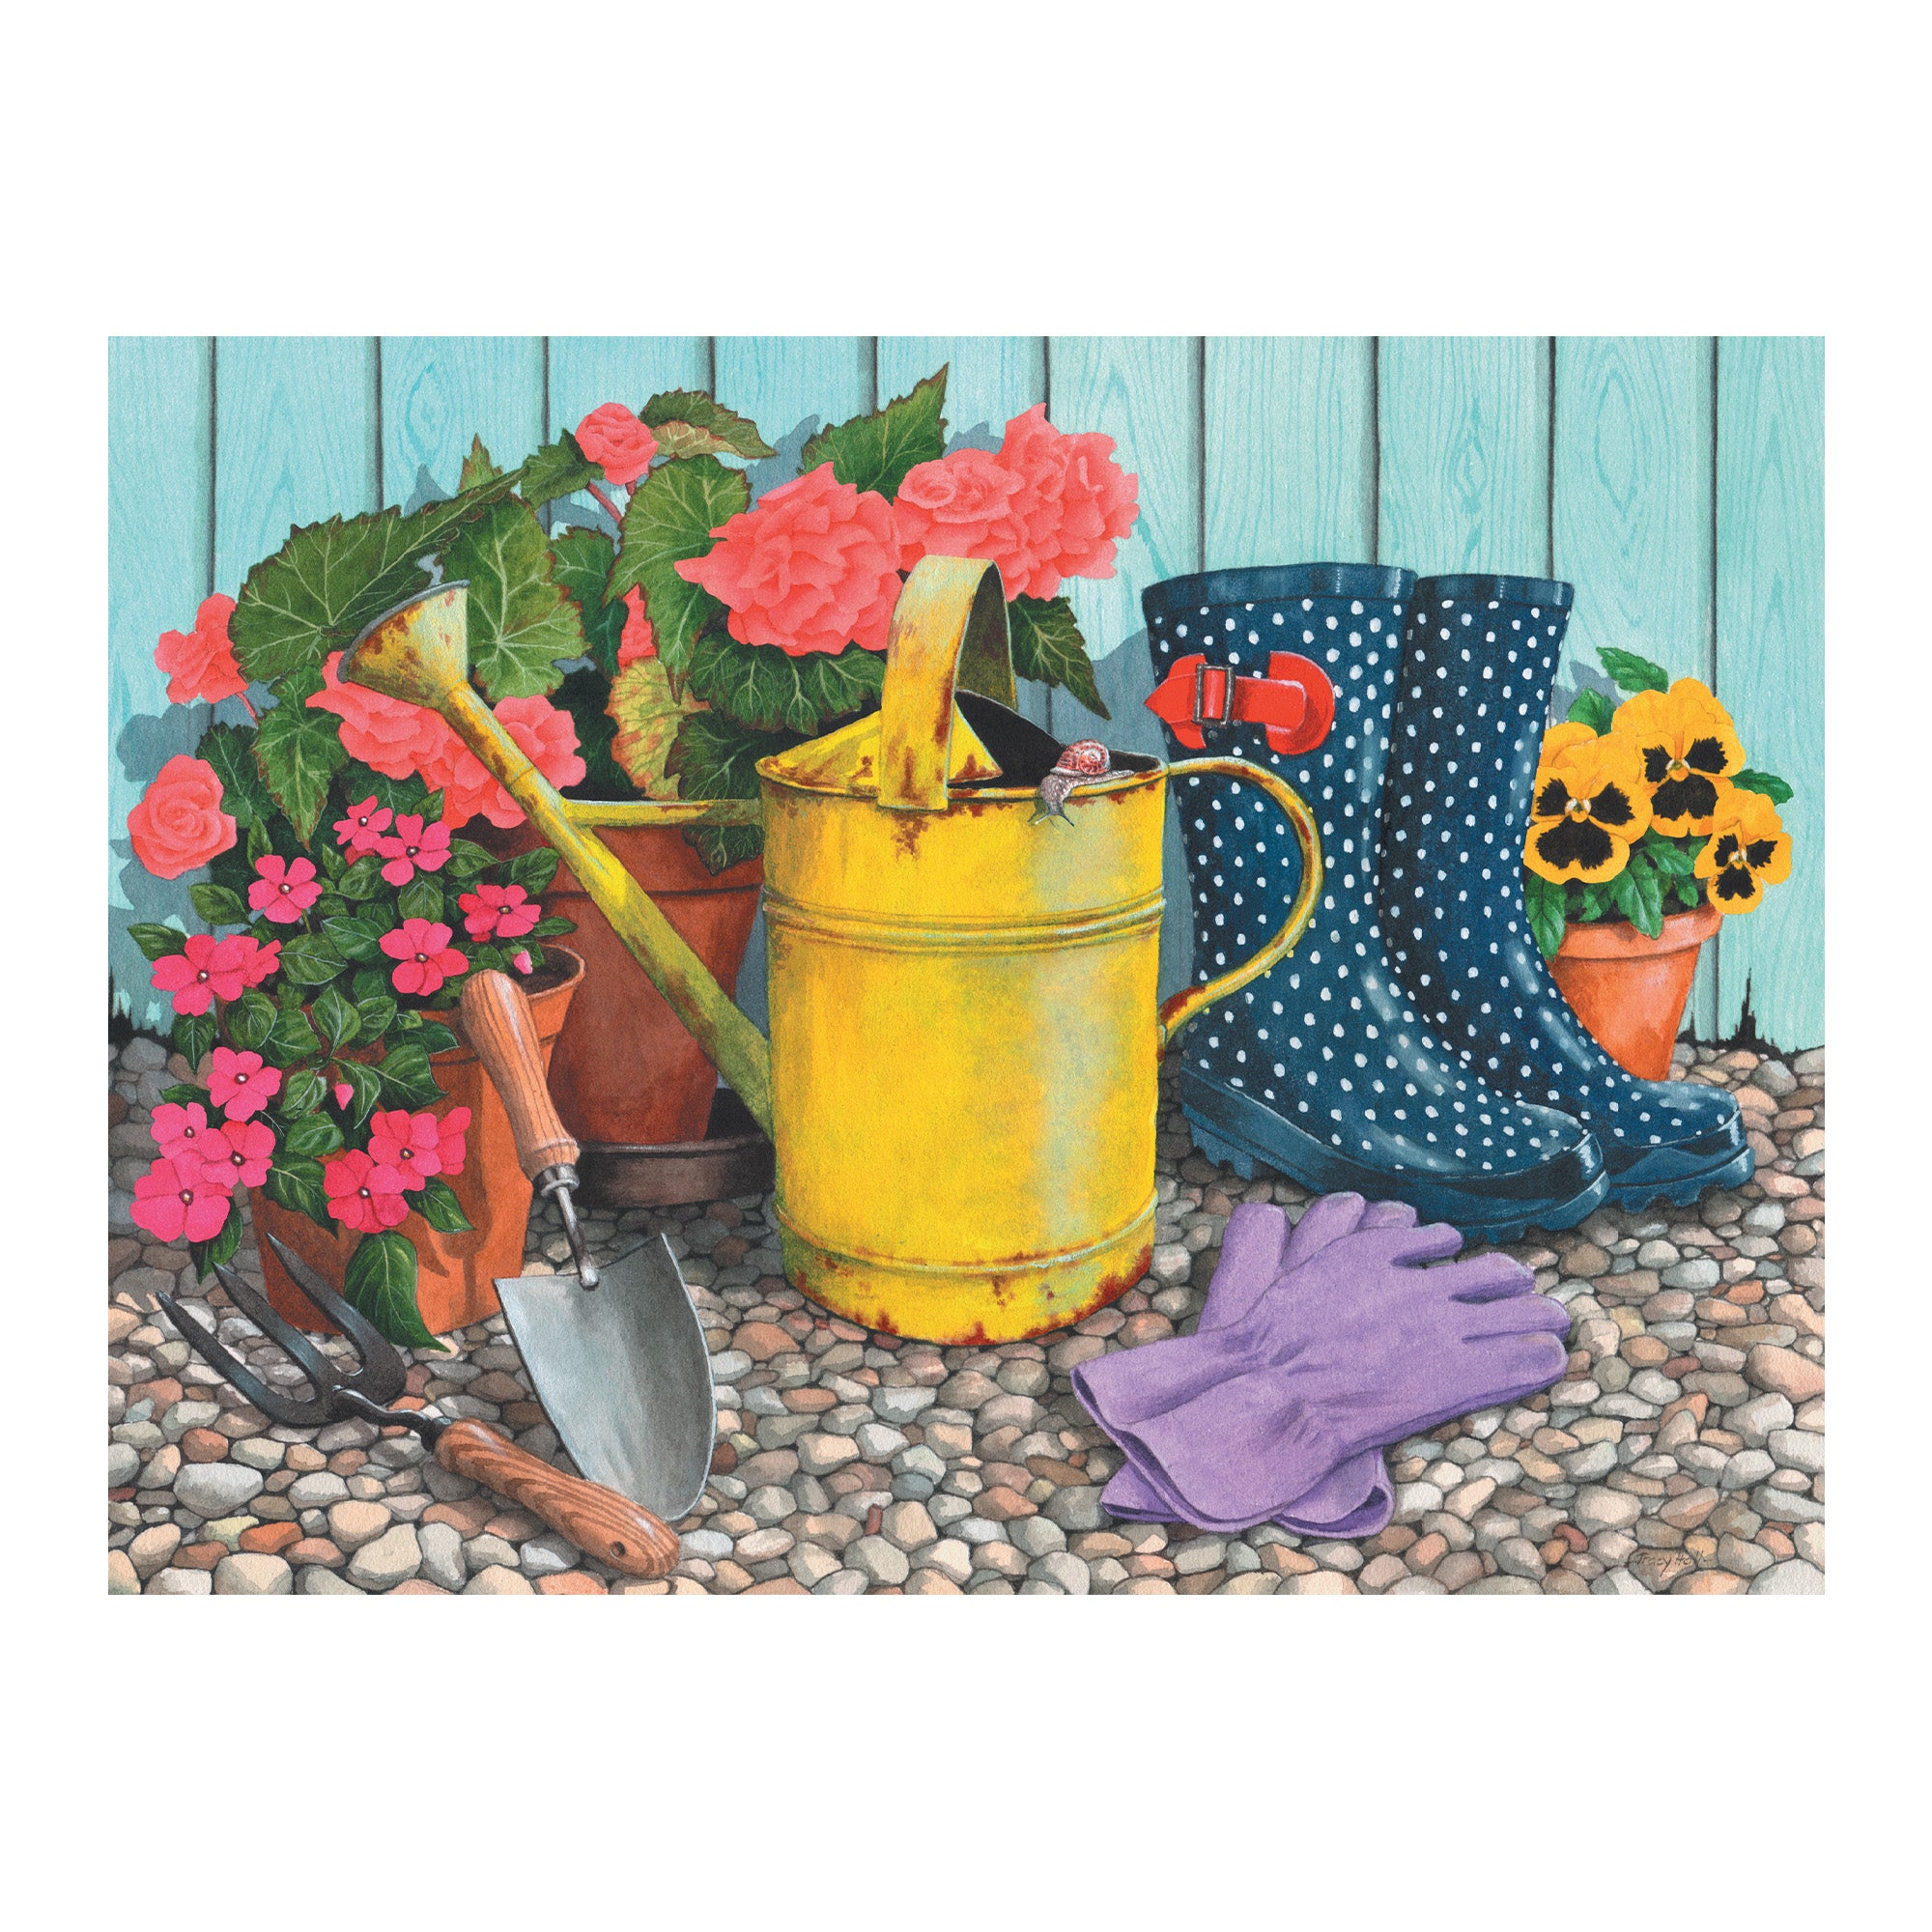 13 Piece Jigsaw Puzzle - Blooming Lovely - VAT Free